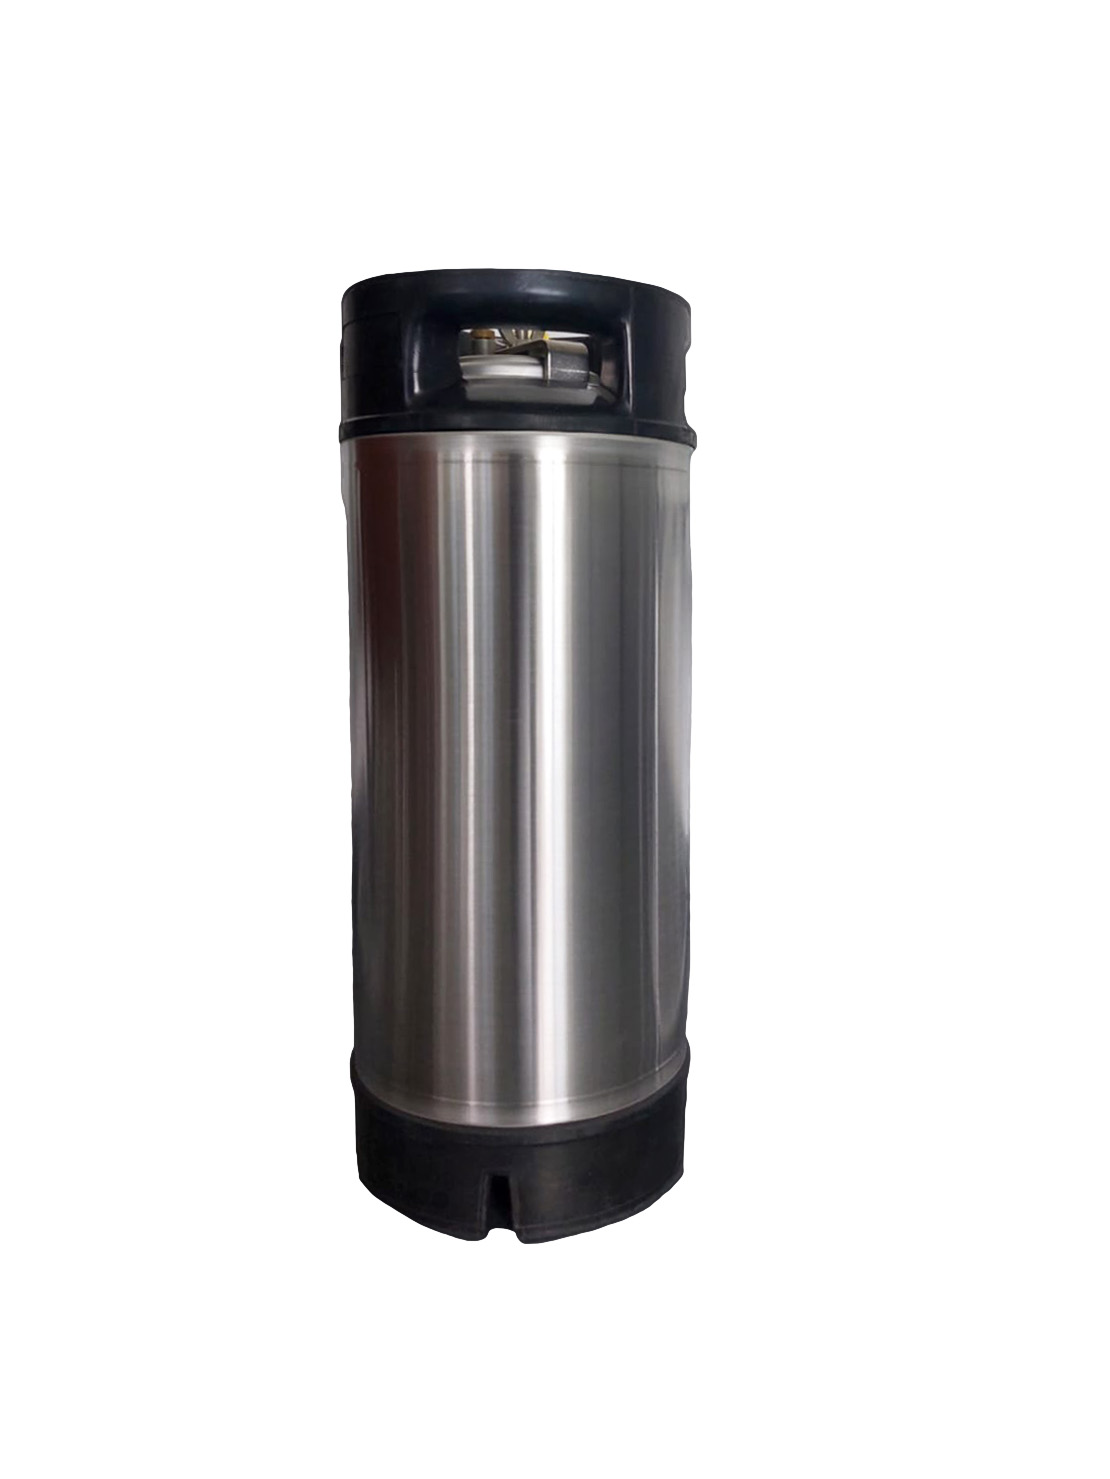 45 Liter Stainless Steel Mixed Bed Demineralization Cartridge Filled with Premium Resin